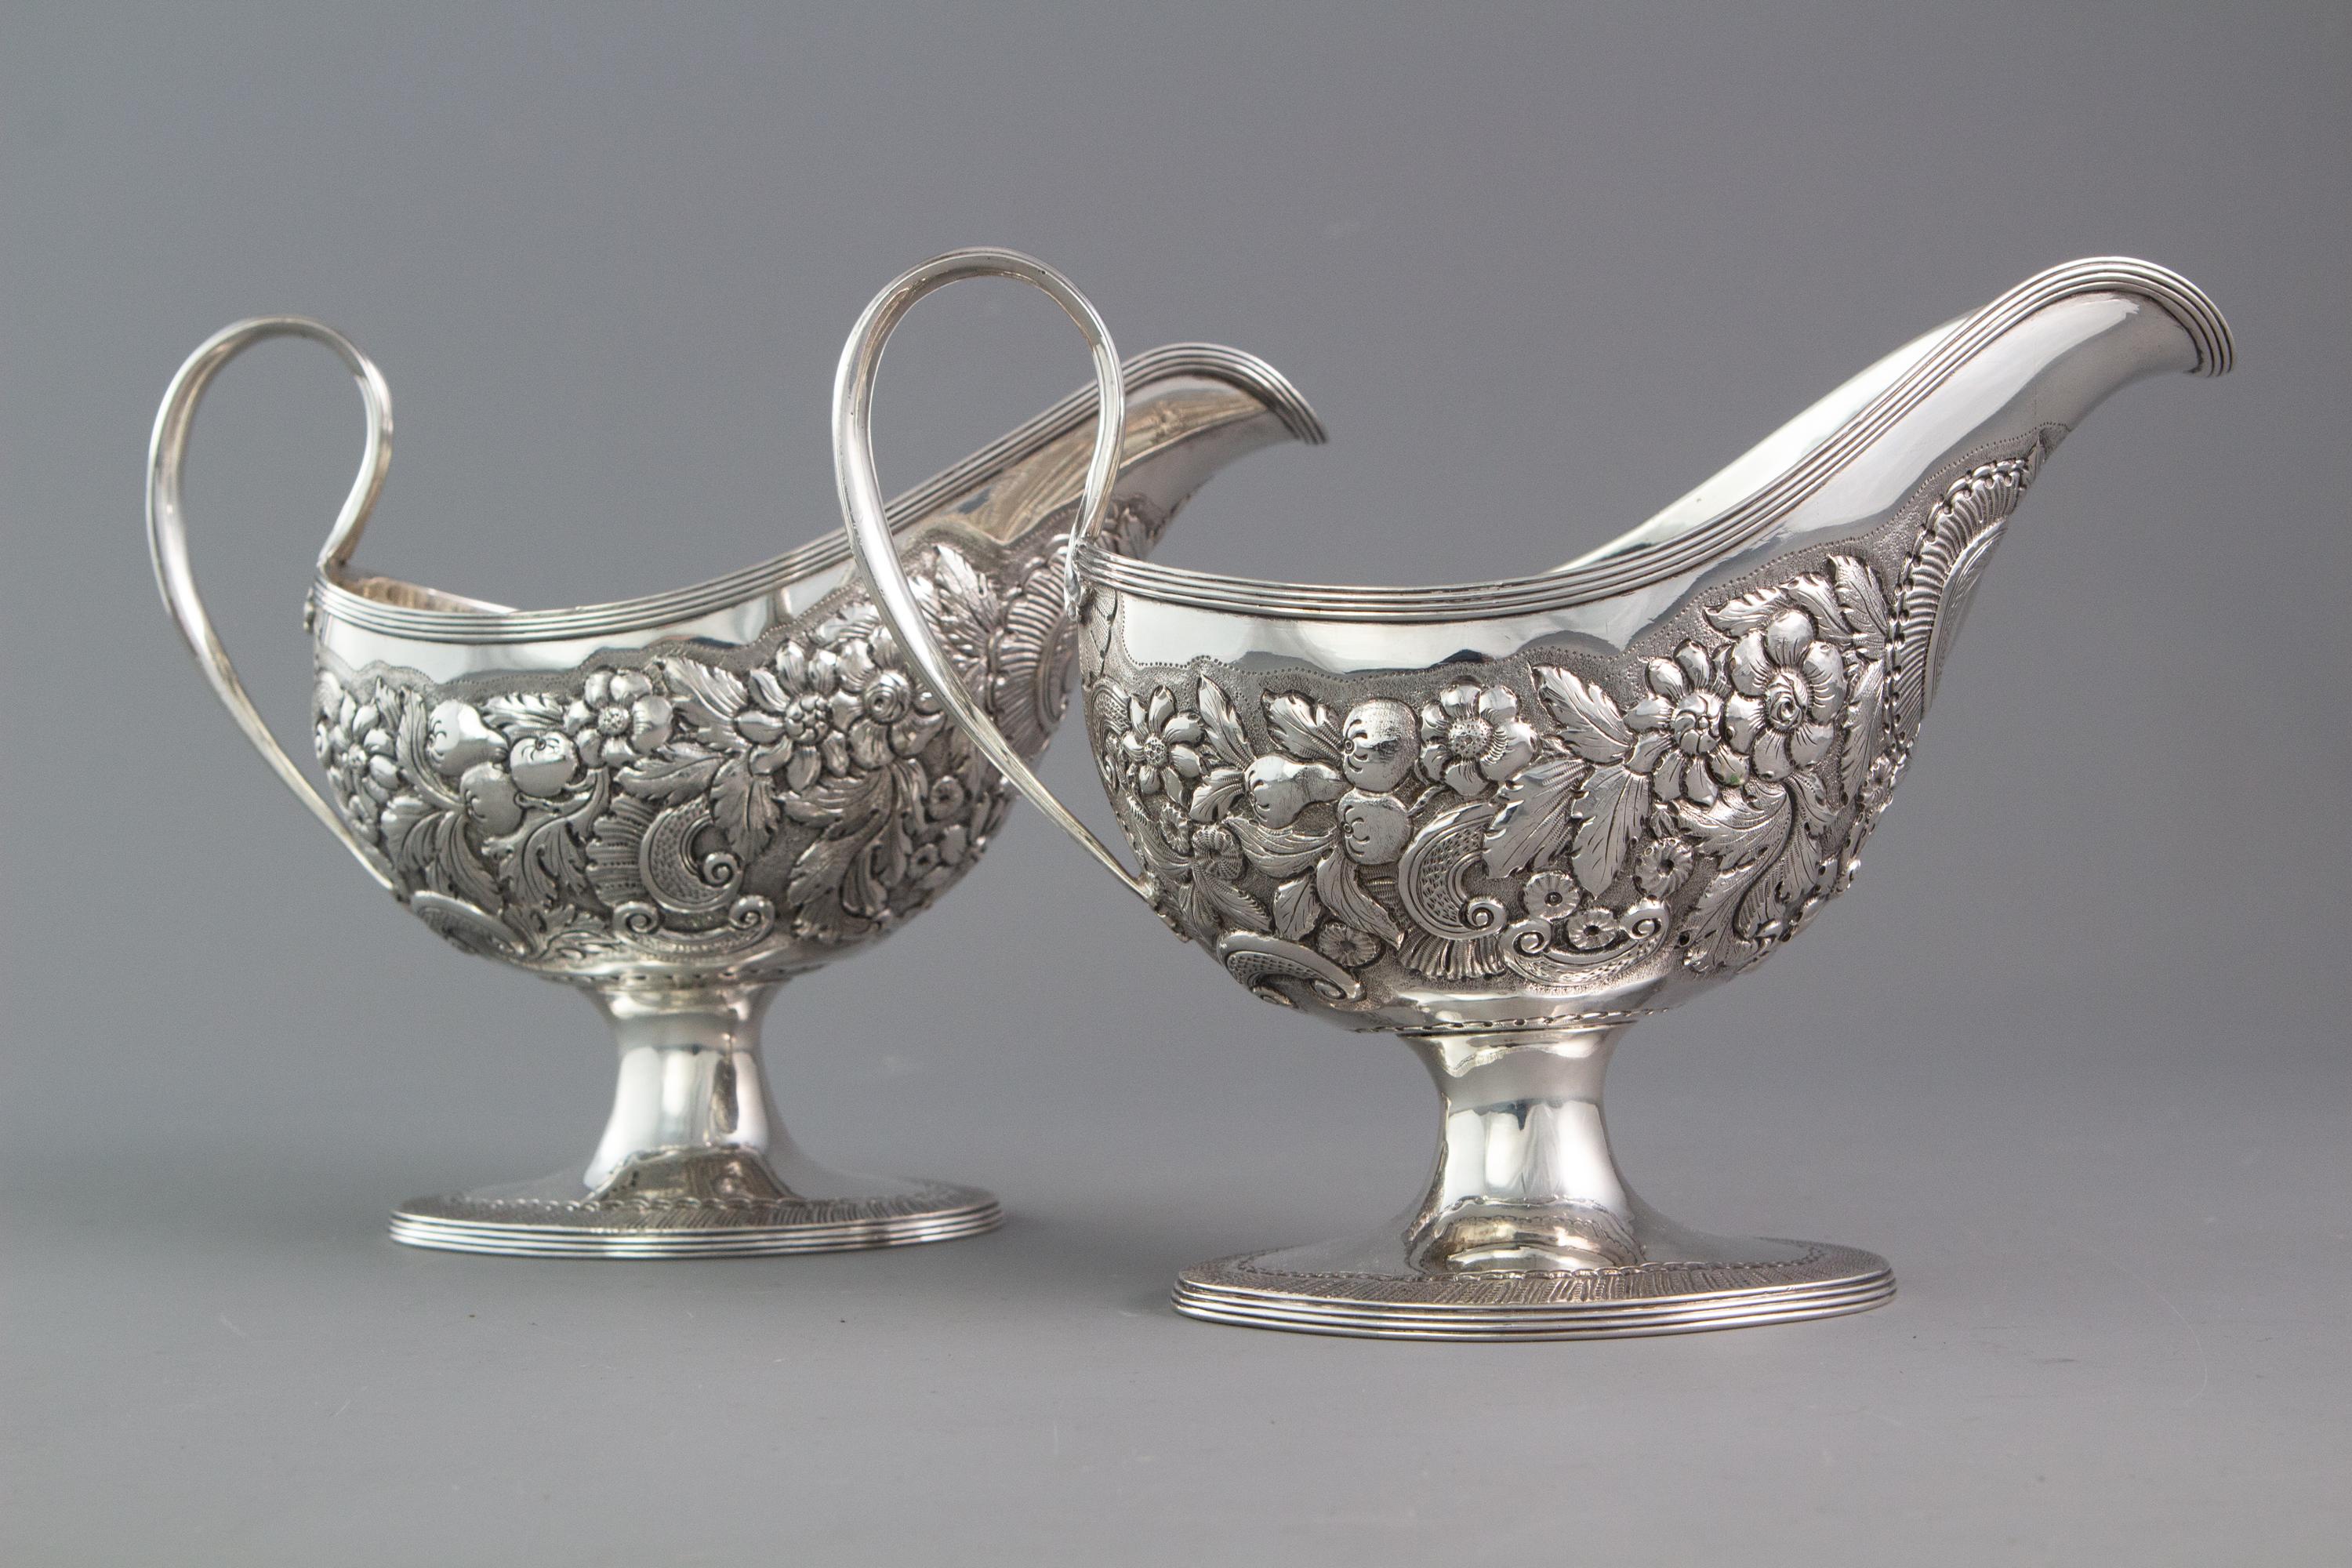 This very attractive and rare pair of Irish sauce boats are of oval form. The shaped body with chased and embossed decoration with a gadrooned rim. The scrolling handle is decorated with an acanthus thumb piece and applied decoration. Both standing